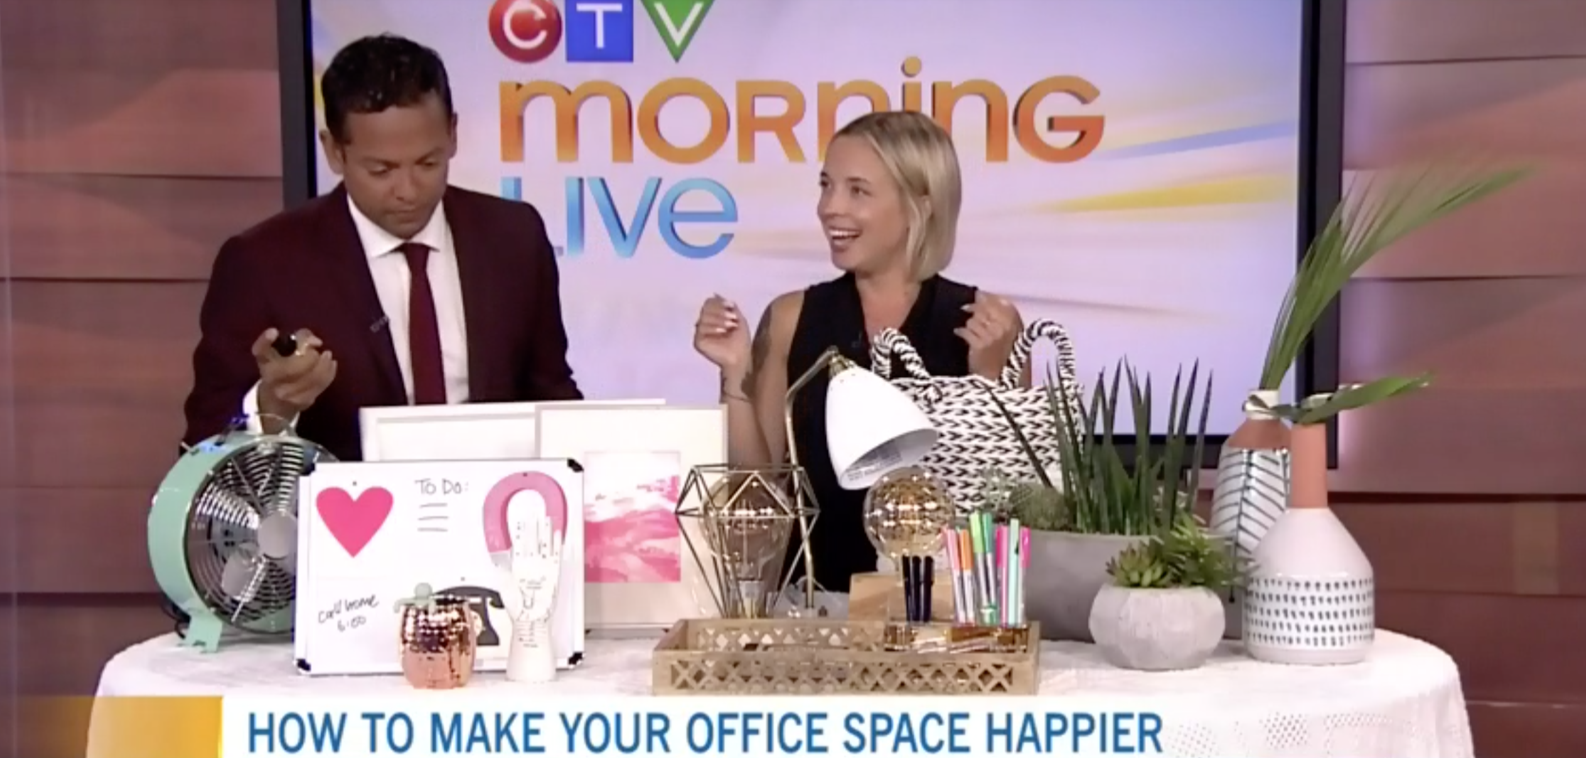 CTV Morning Live: Designing an inviting workplace